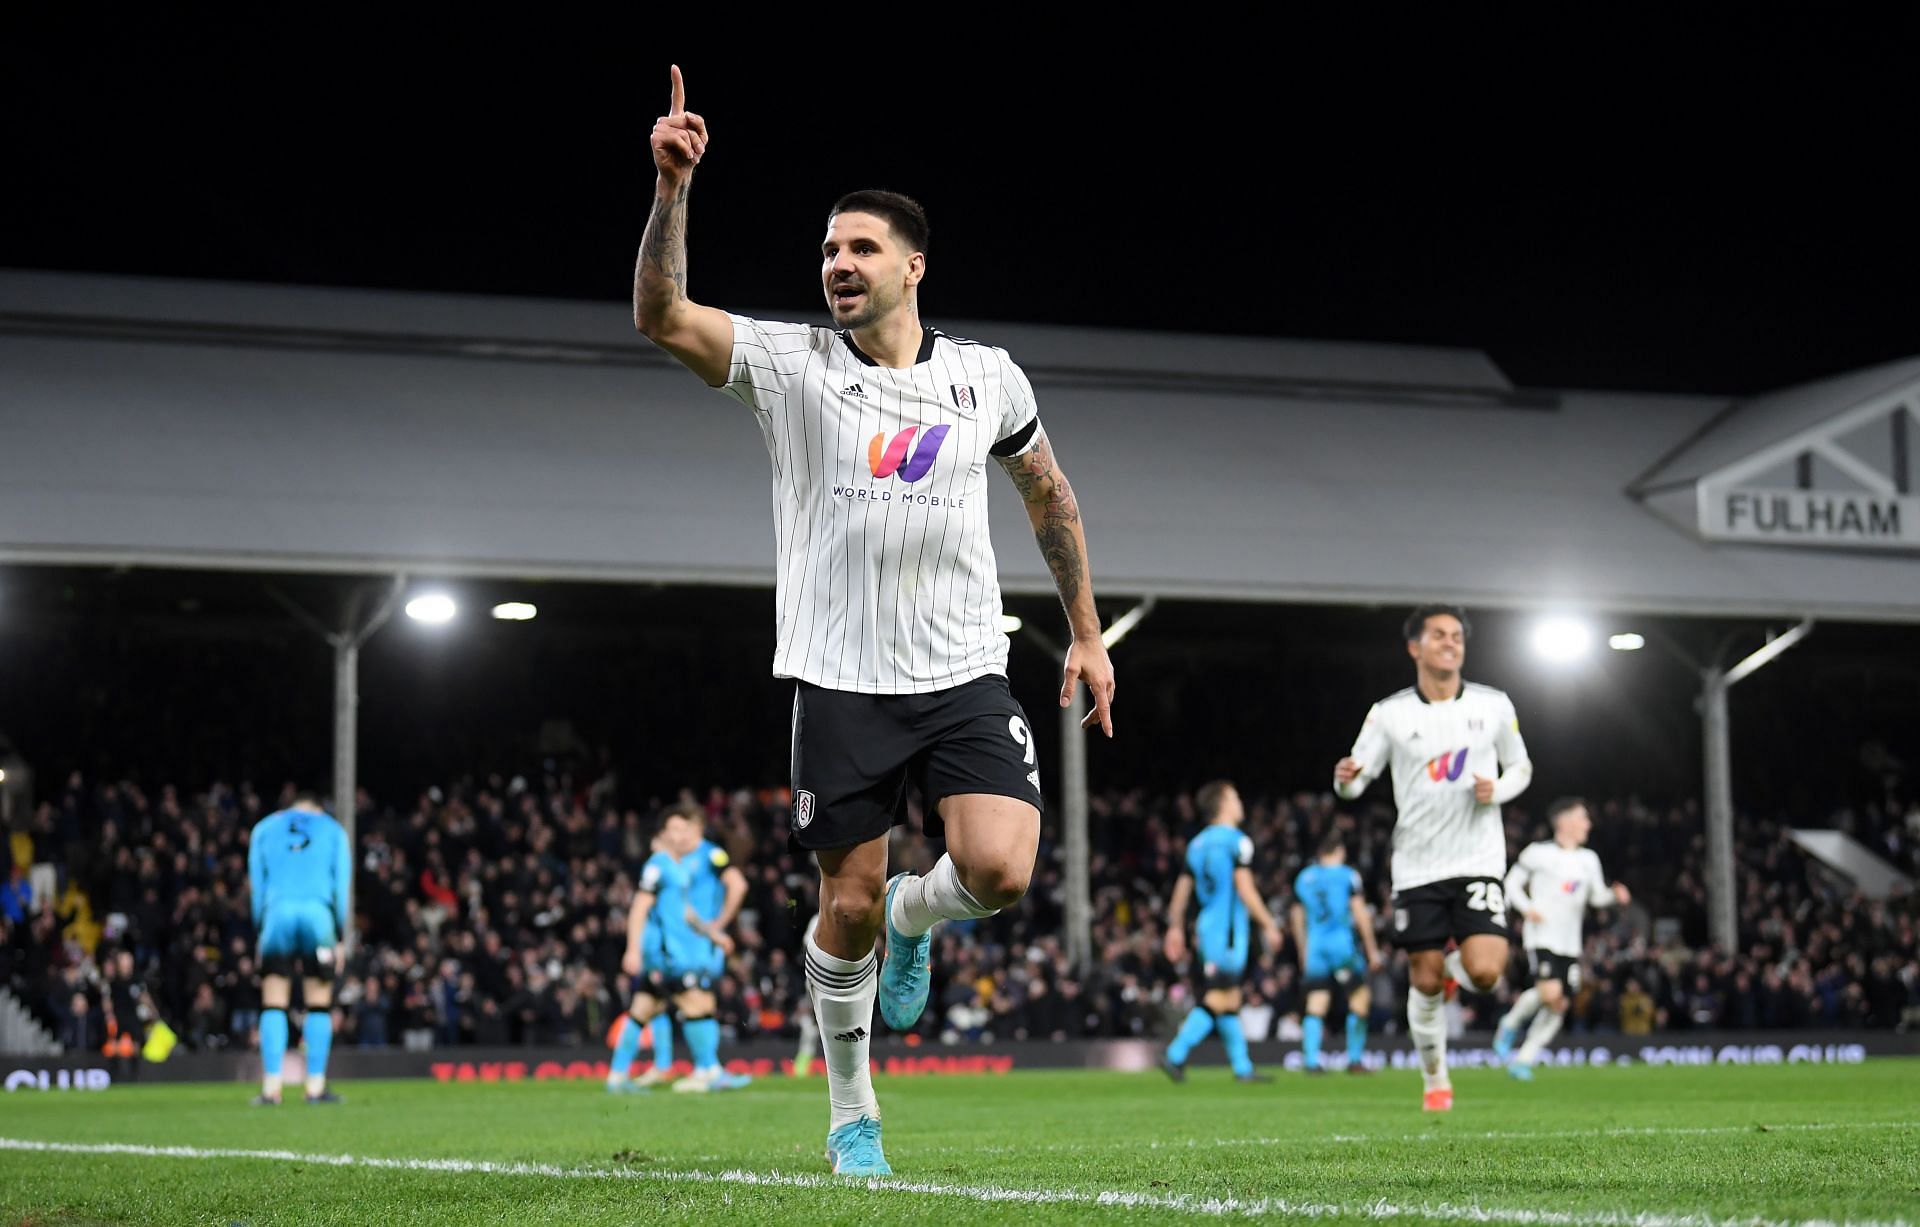 Aleksandar Mitrovic boasts exceptional numbers playing for Fulham